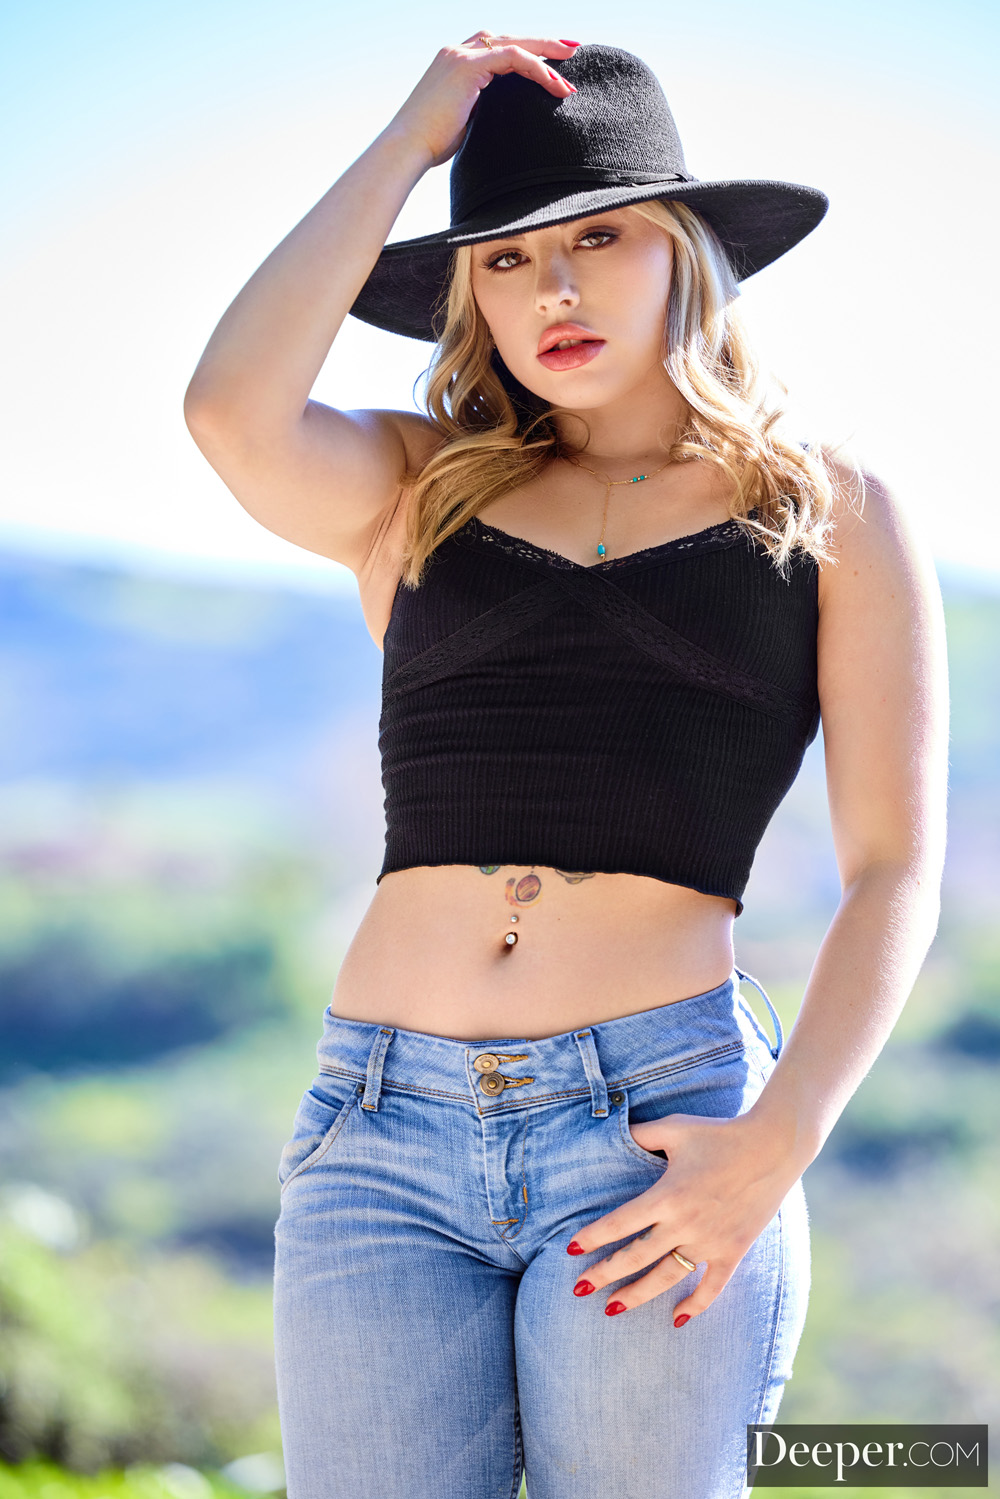 Anna Claire Clouds gets drilled by two cowboys at the ranch